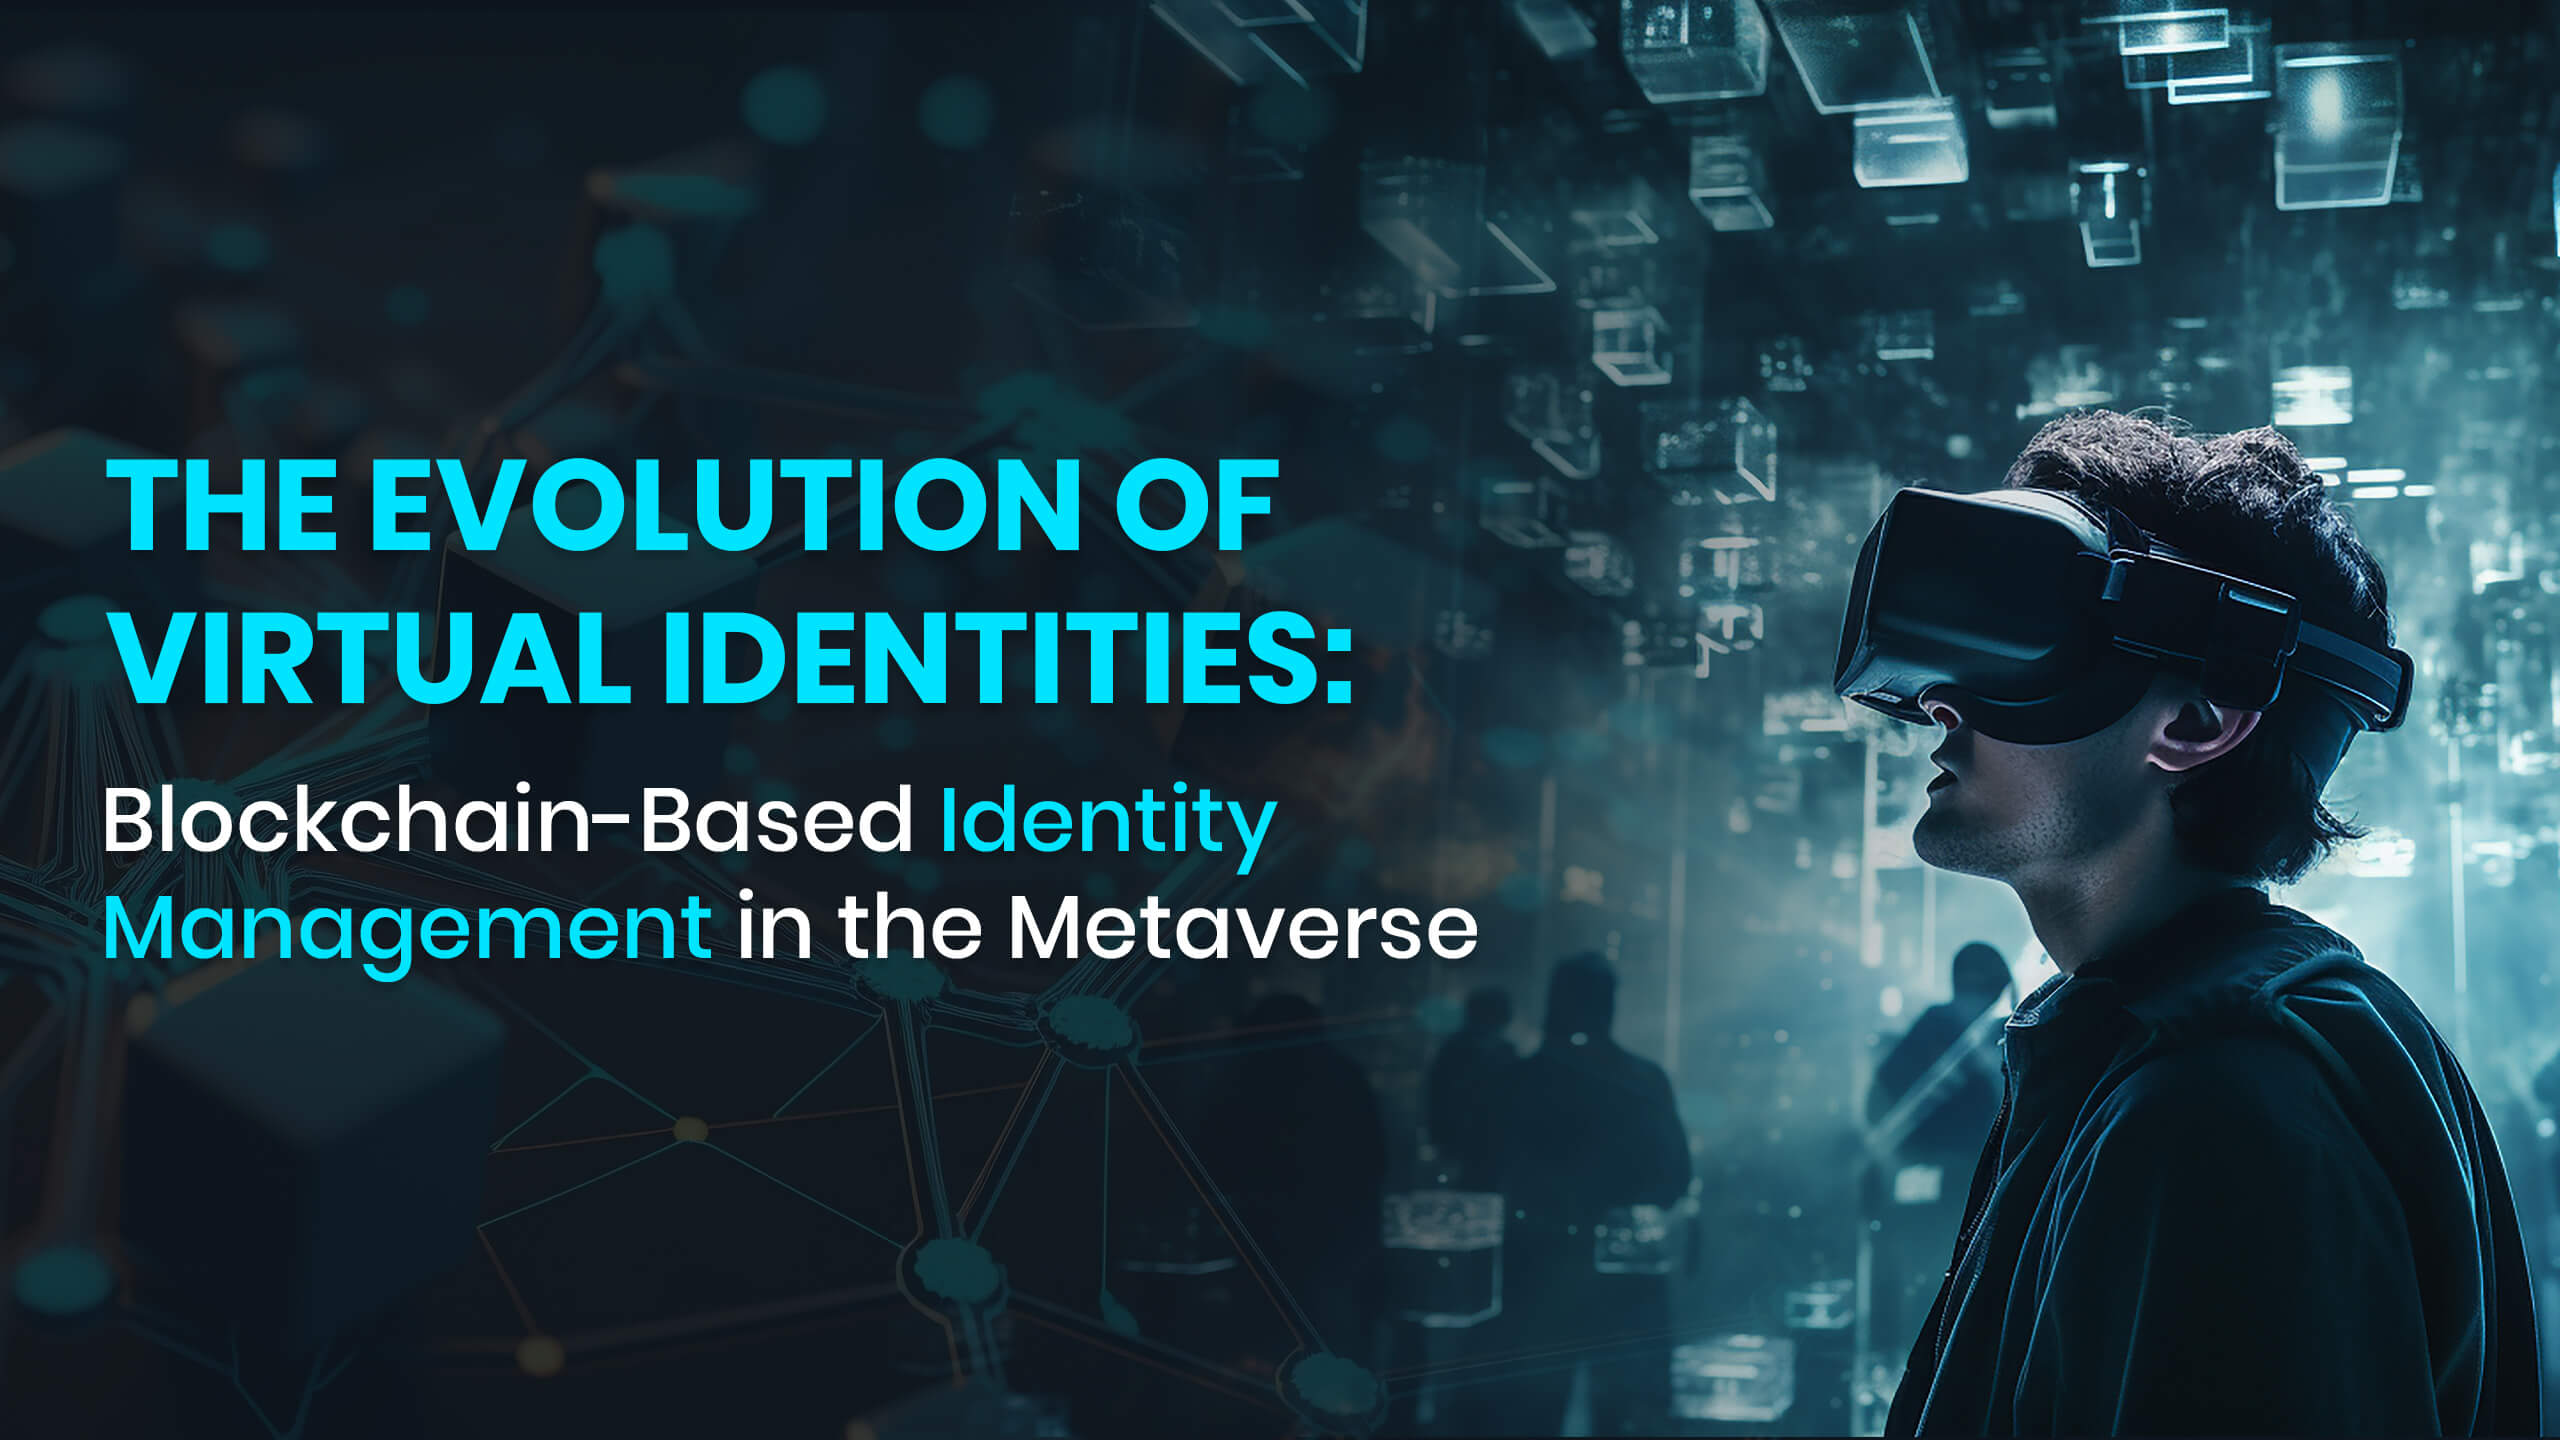 Blockchain-Based Identity Management in the Metaverse